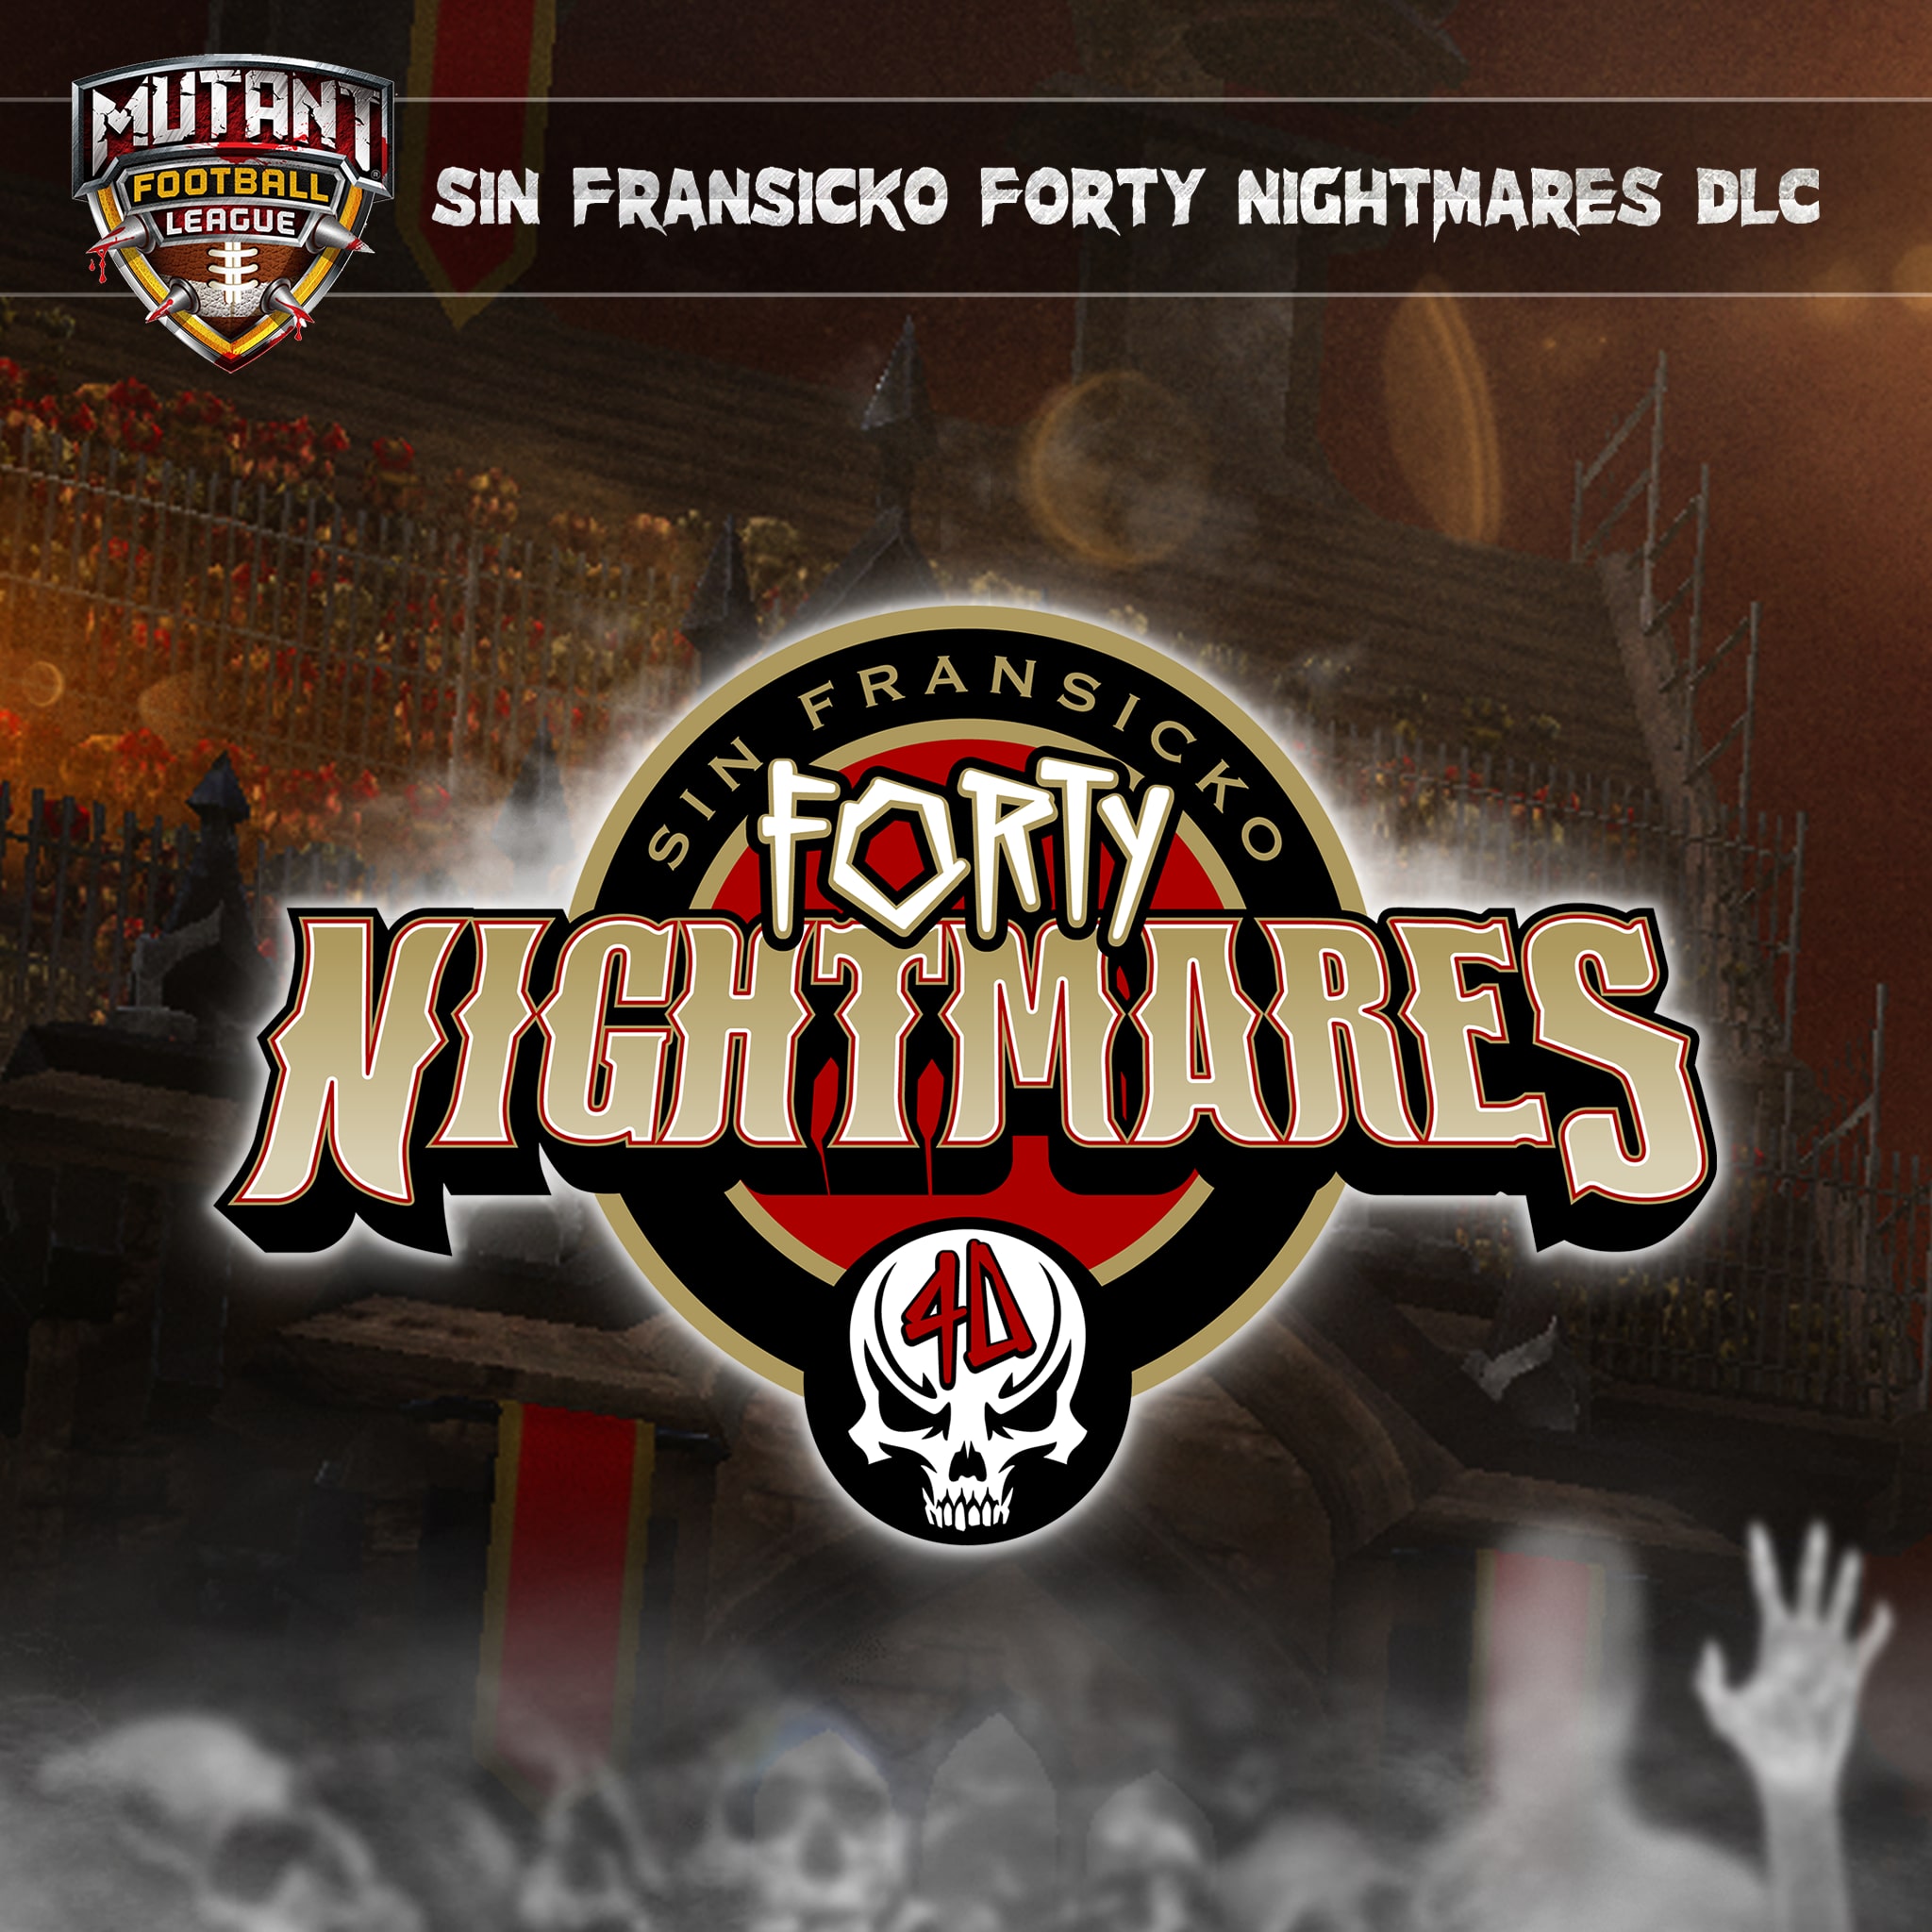 Mutant Football League - Sin Fransicko Forty Nightmares